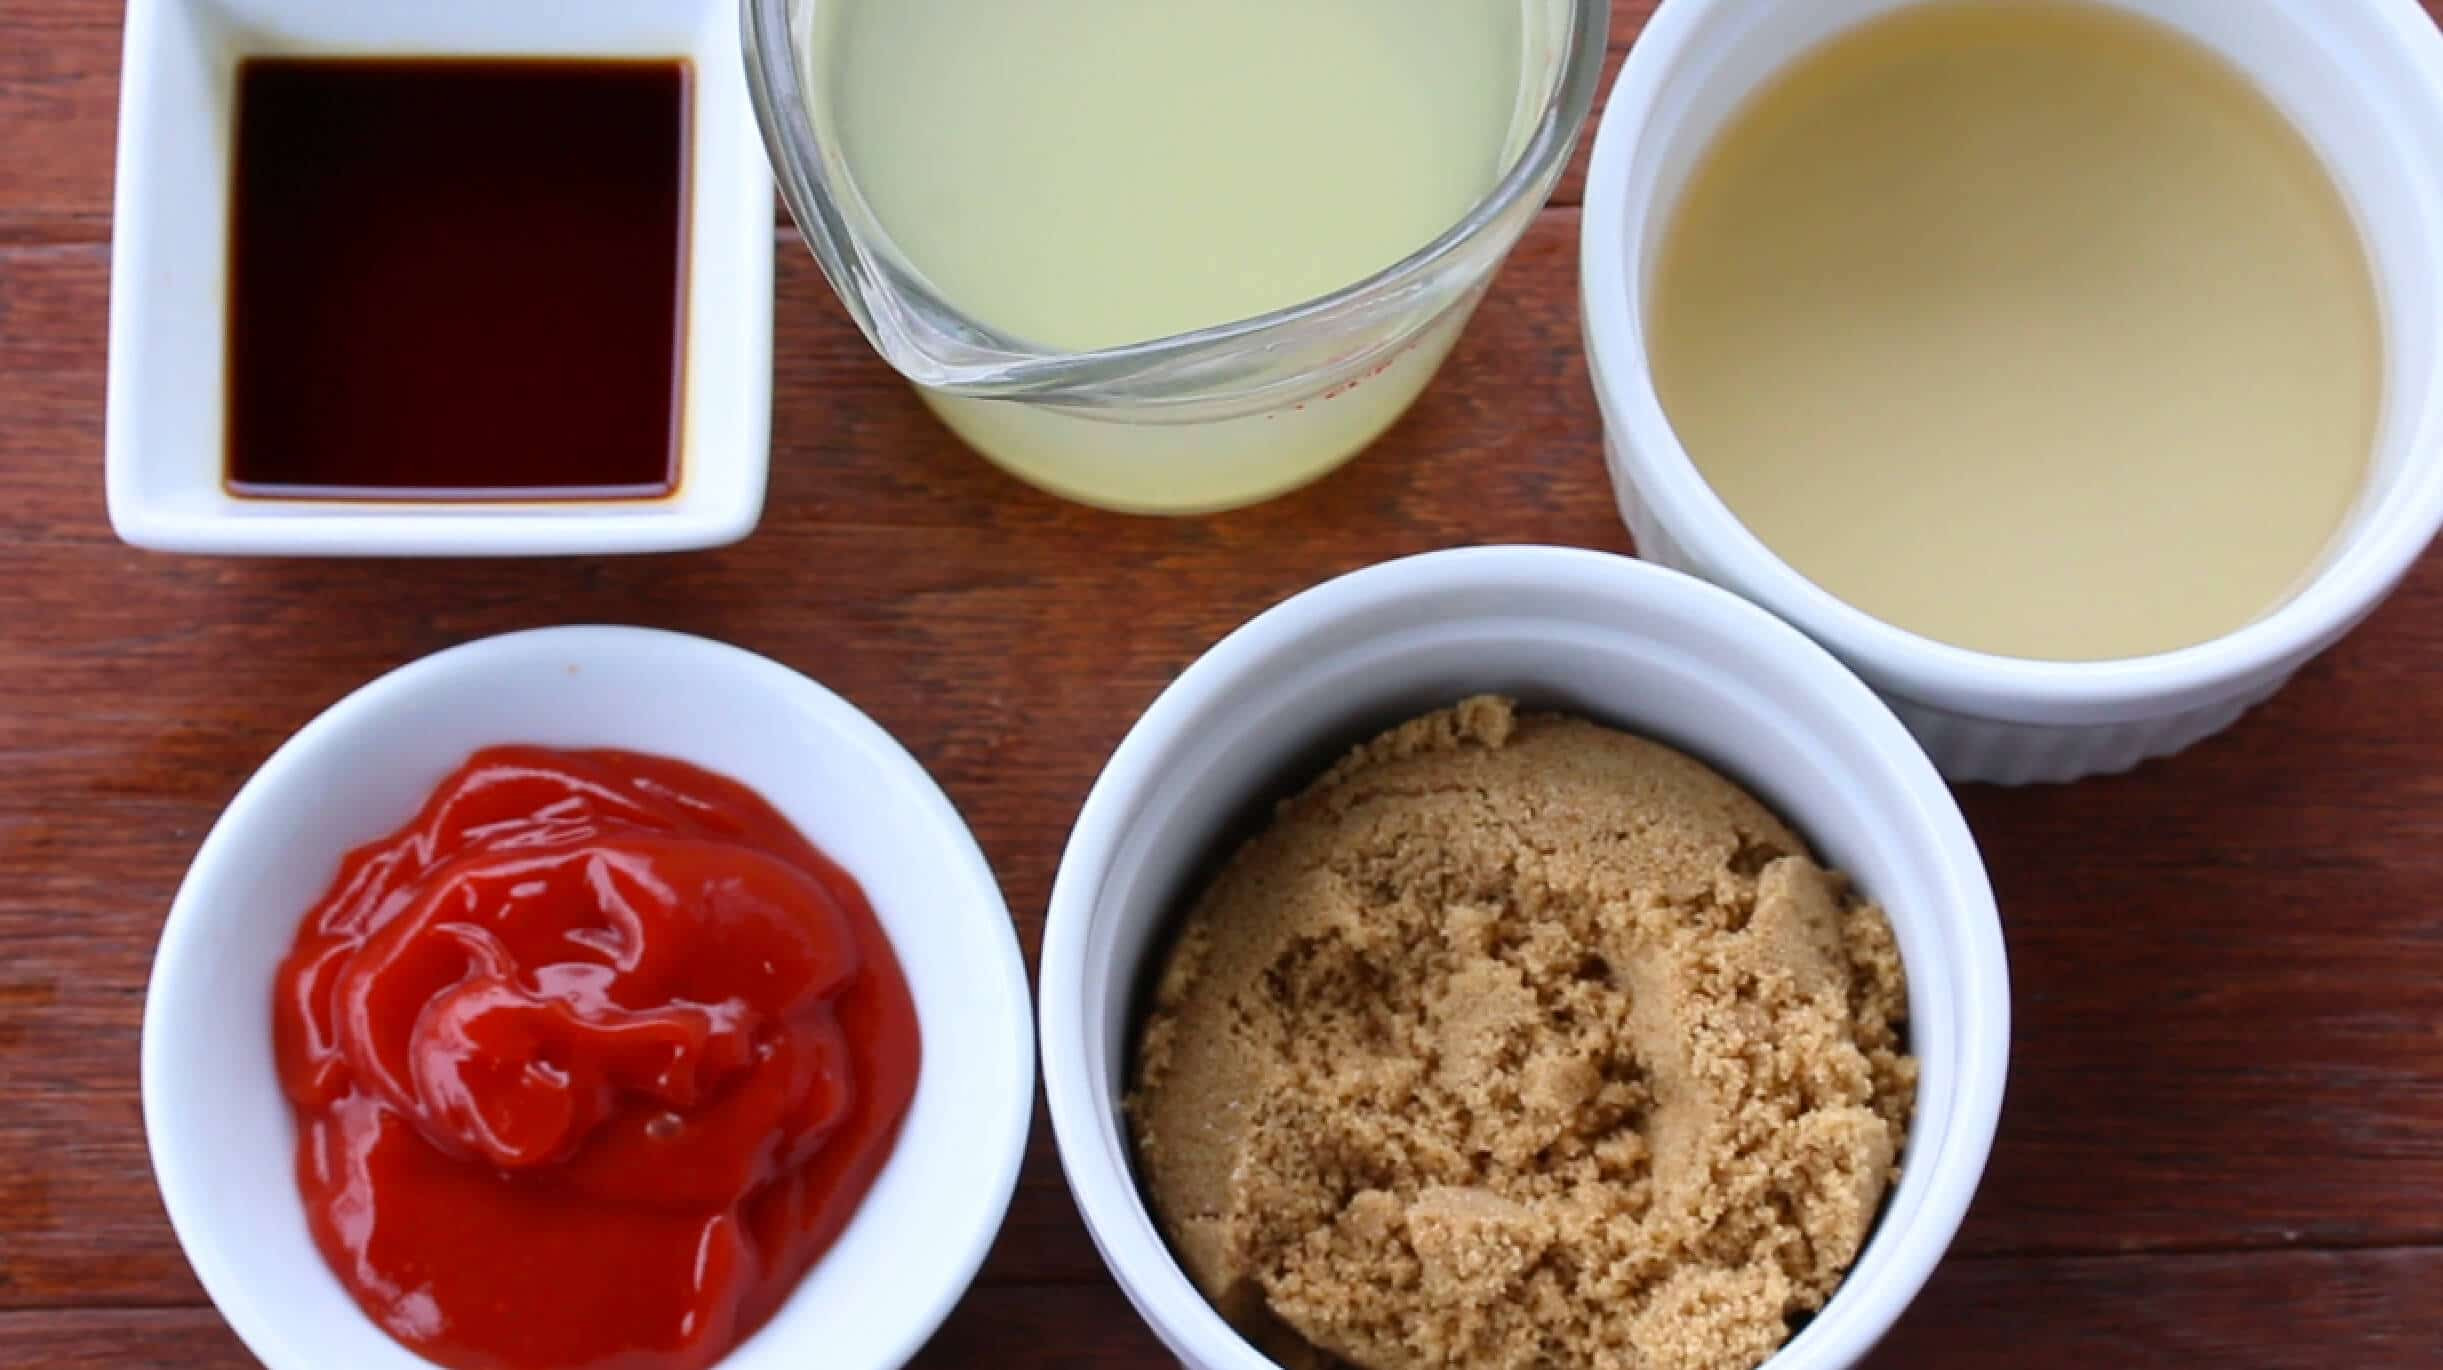 Chinese Sweet And Sour Sauce Recipes
 BEST Sweet & Sour Sauce The Daring Gourmet